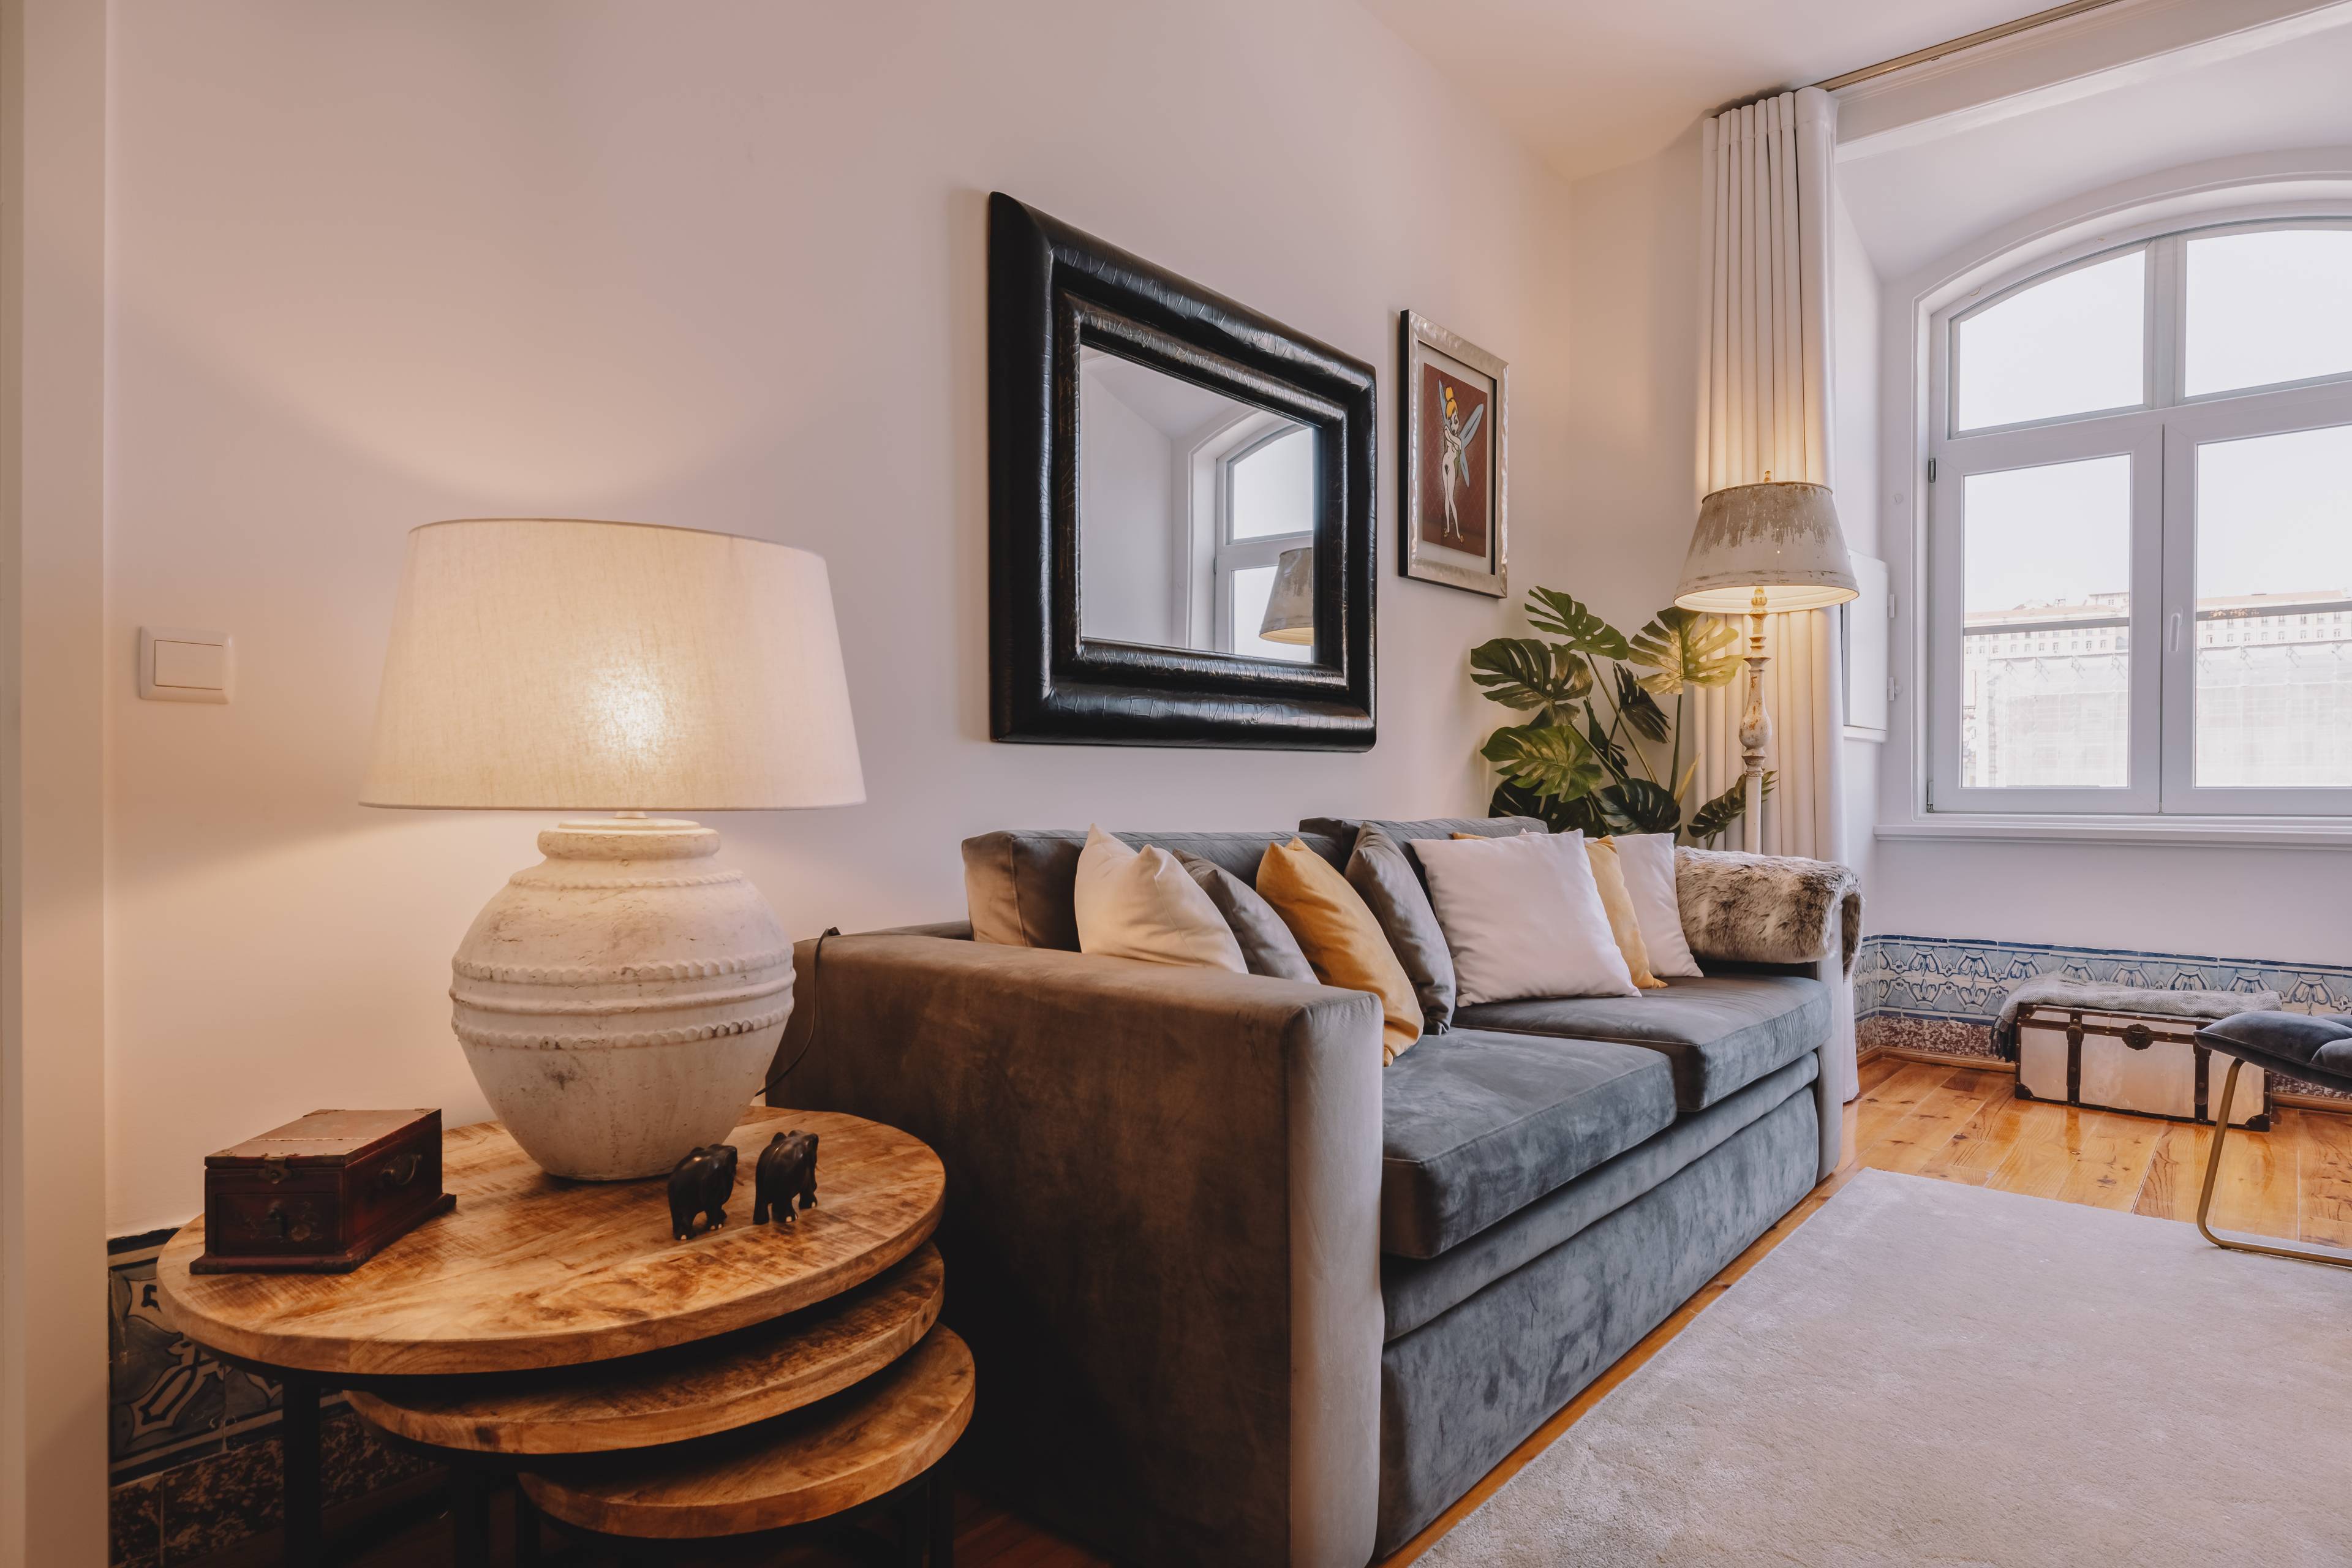 2 Bedroom Apartment in the Heart of Lisbon